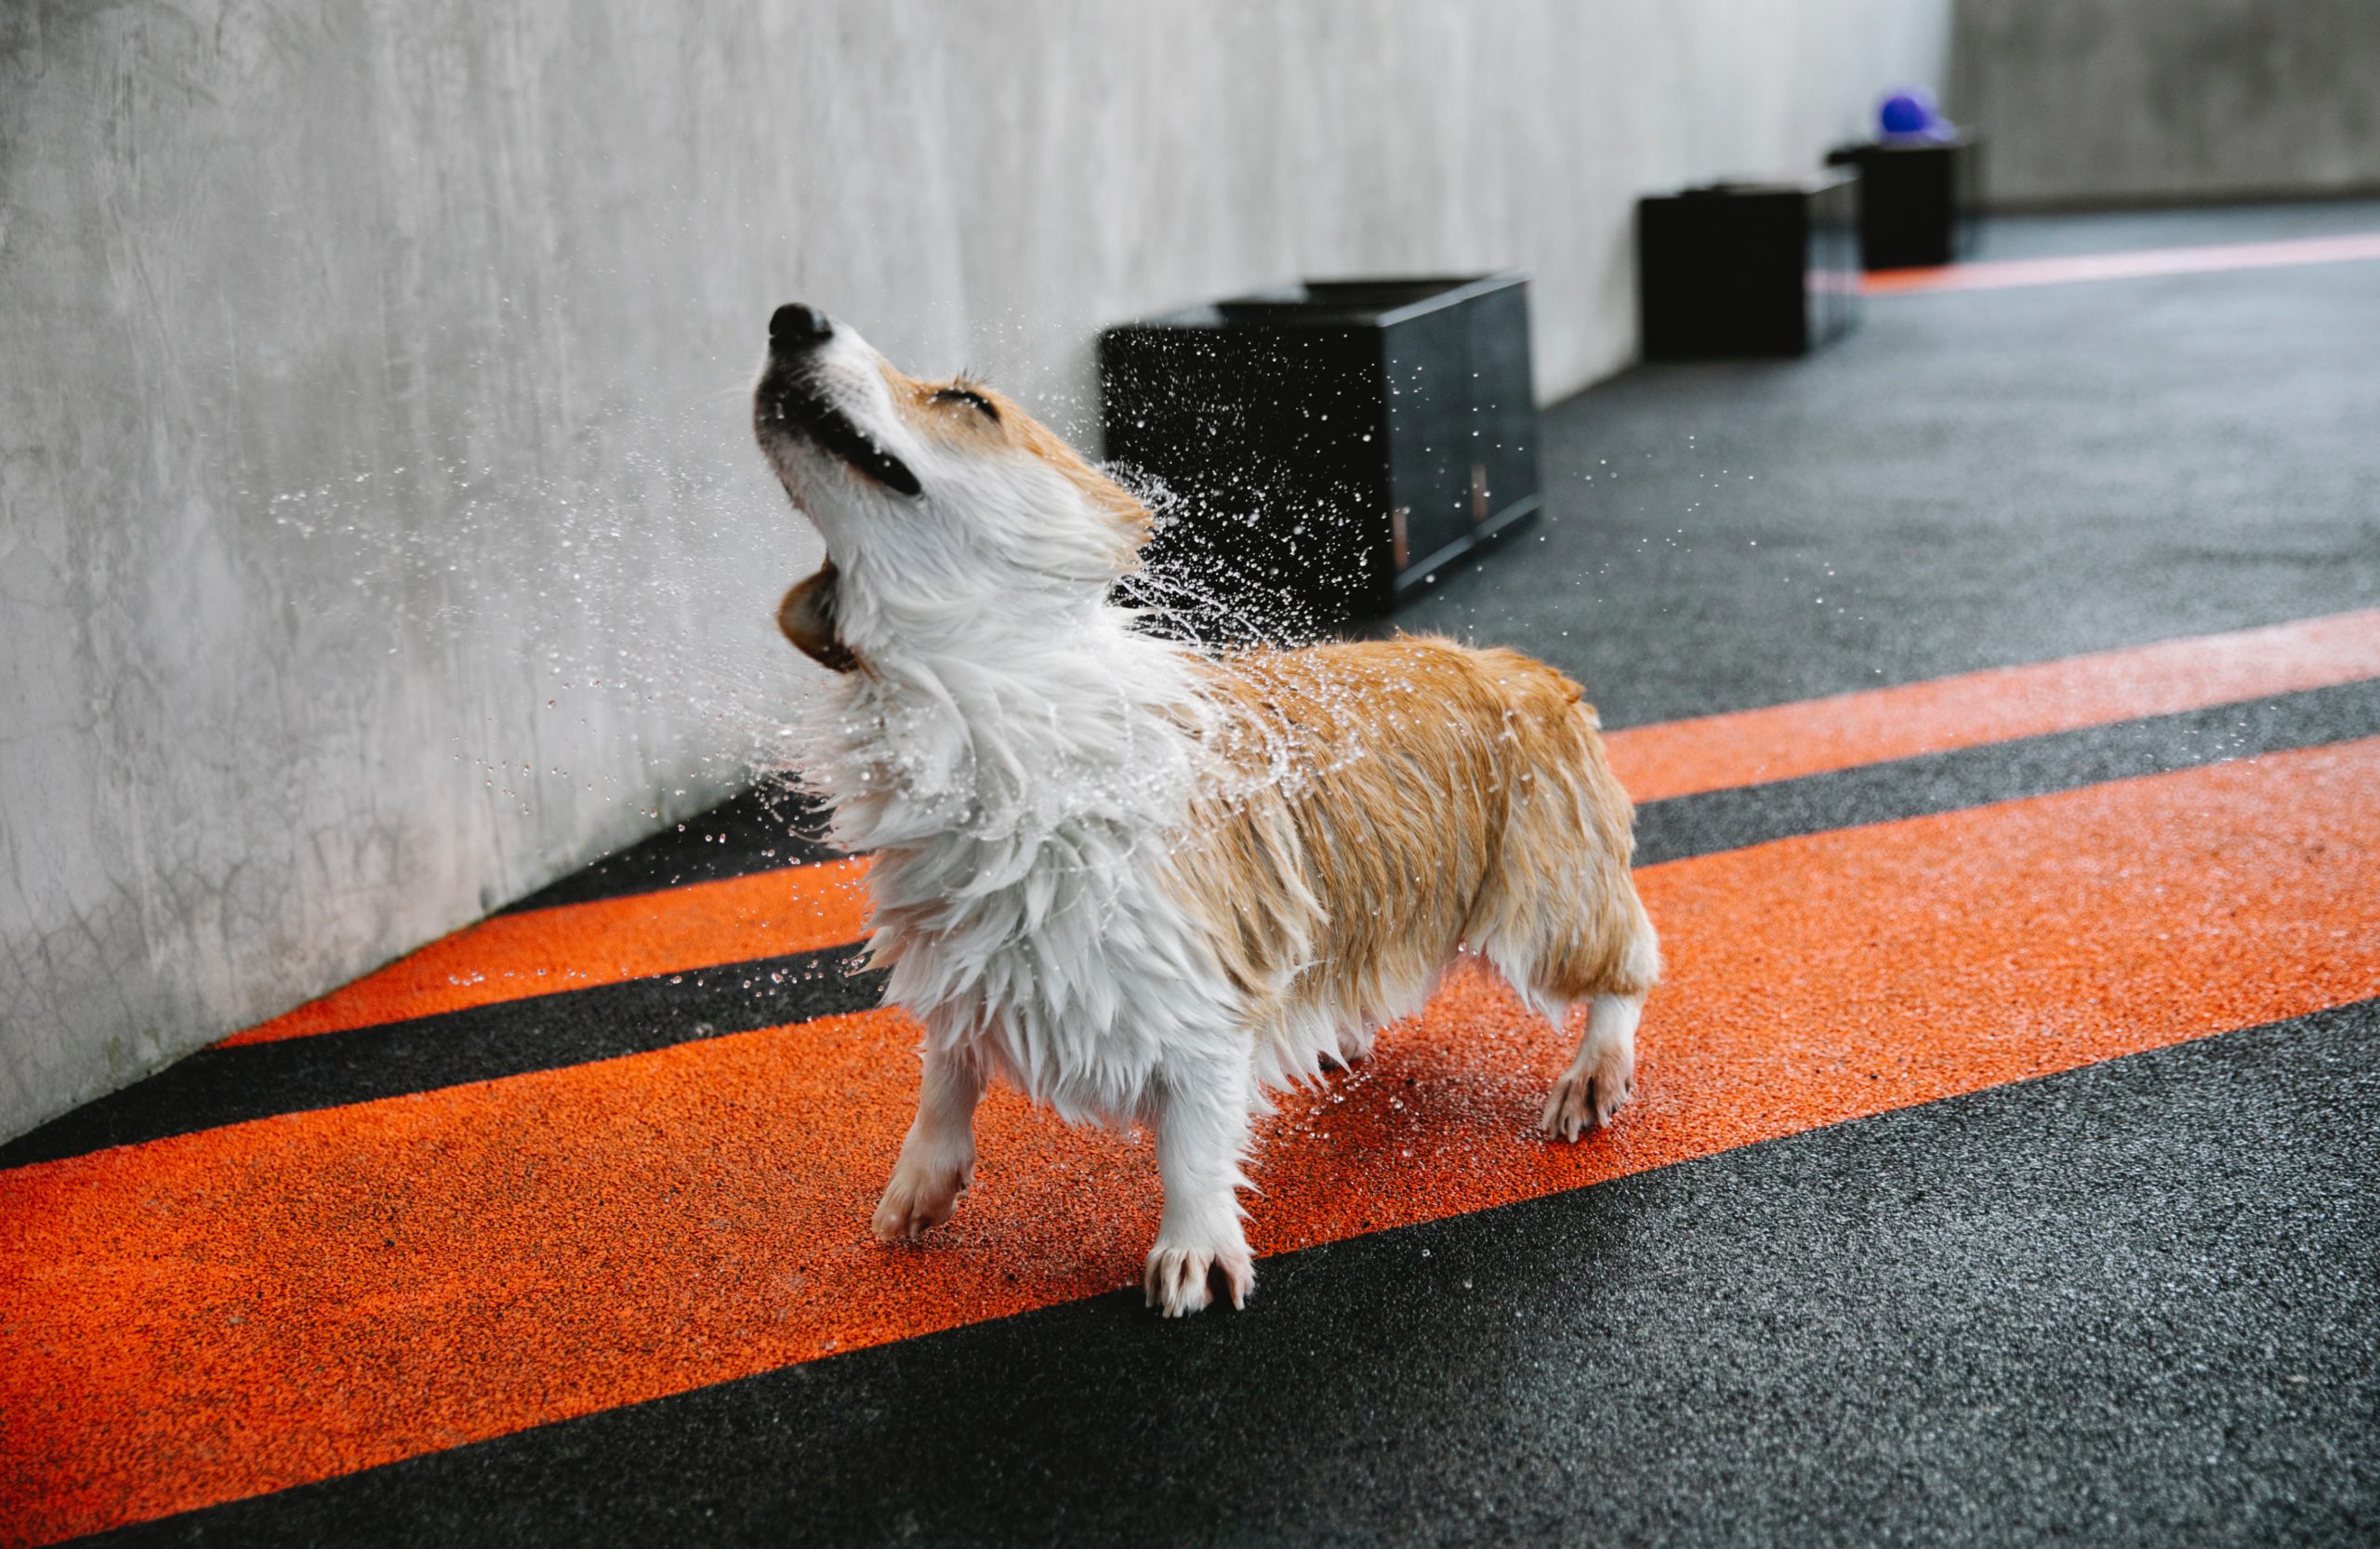 Wet dog shaking it off in an open room with grey and orange floor